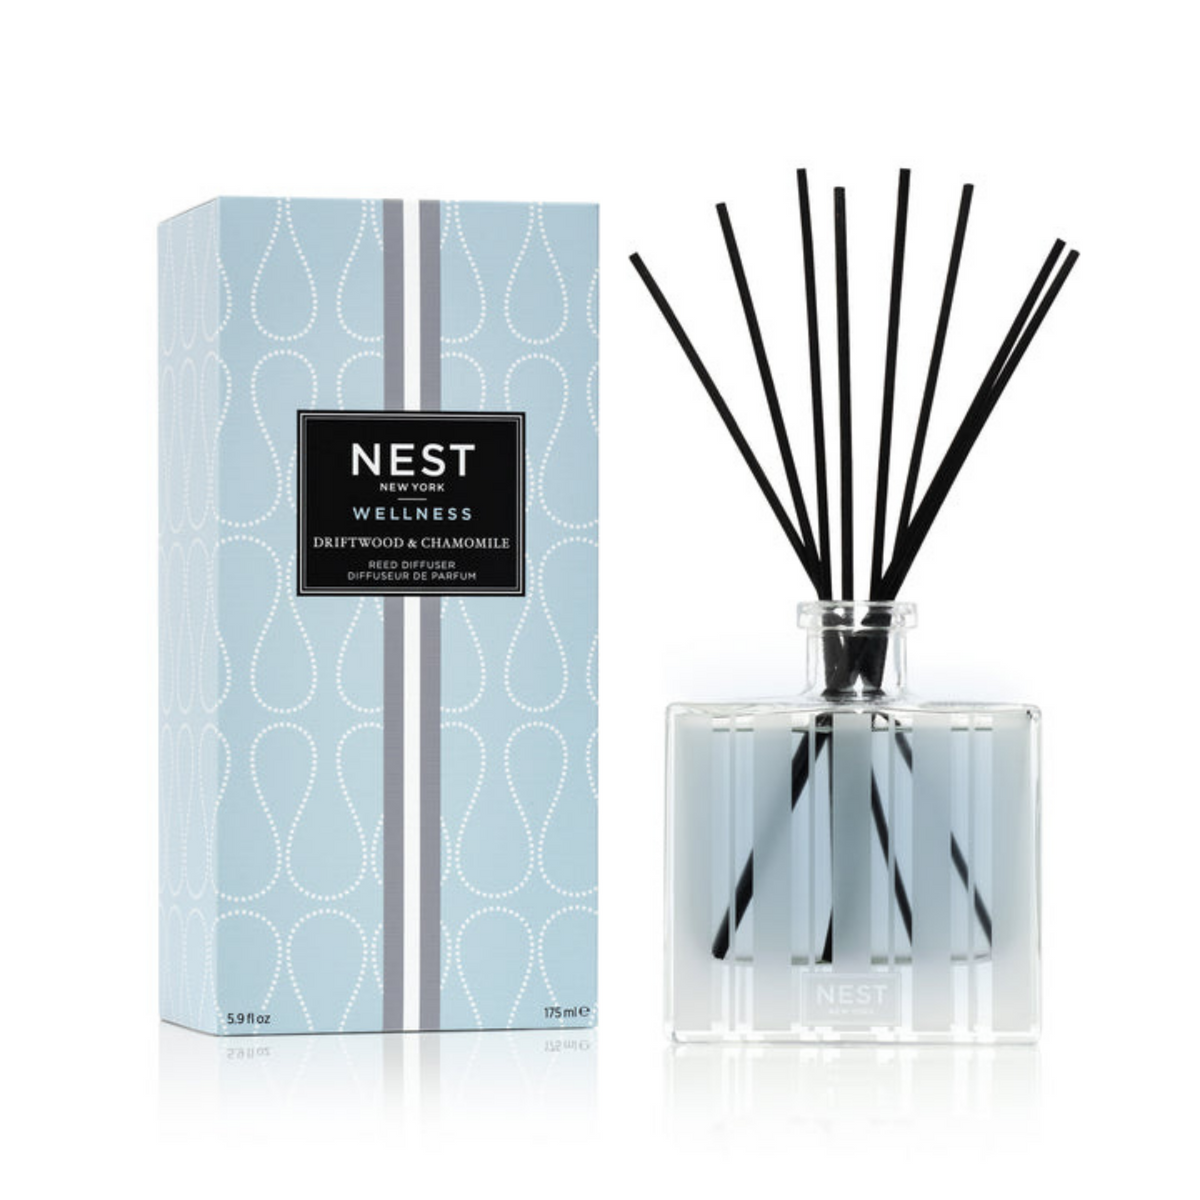 Primary Image of Driftwood & Chamomile Reed Diffuser